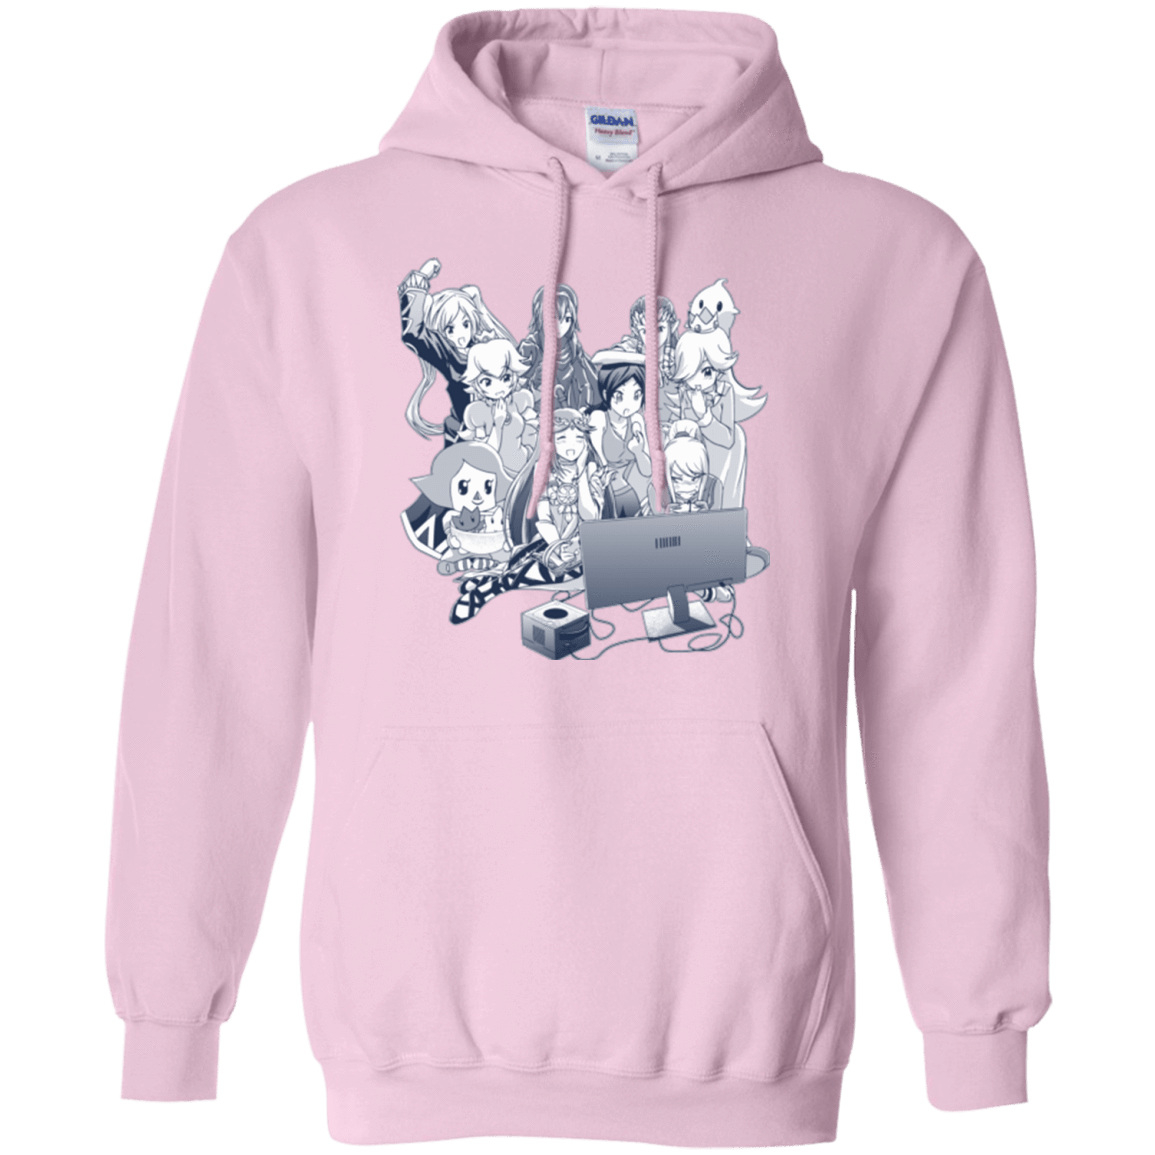 Sweatshirts Light Pink / Small Girls Night Out Pullover Hoodie